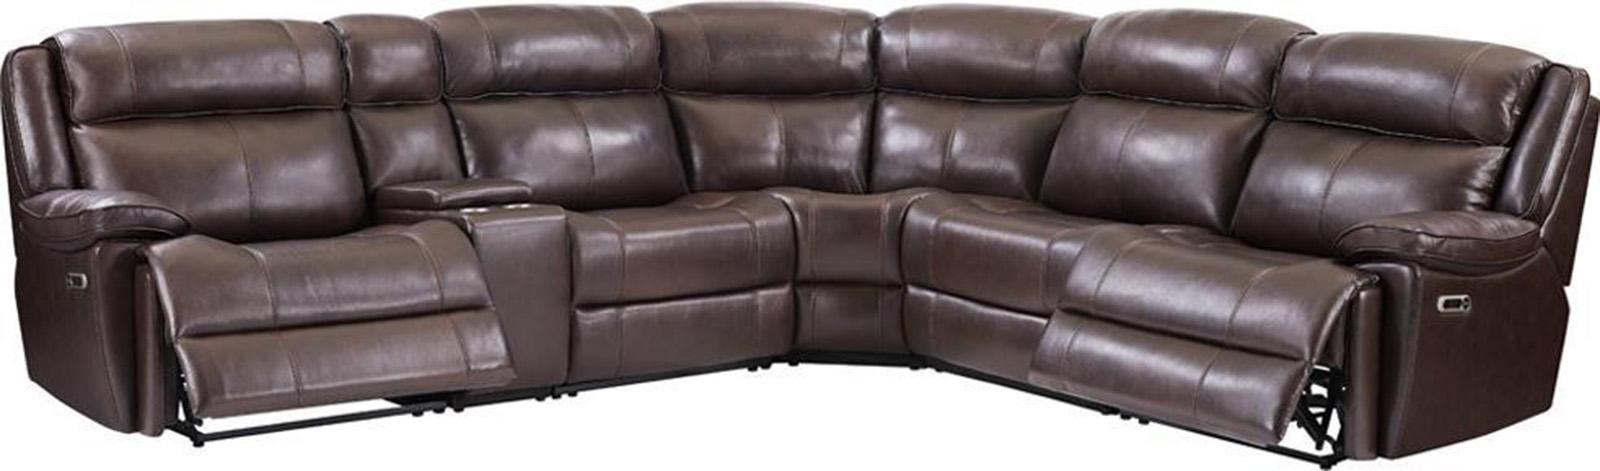 Parker House Furniture Eclipse Power Right Arm Facing Recliner in Florence Brown